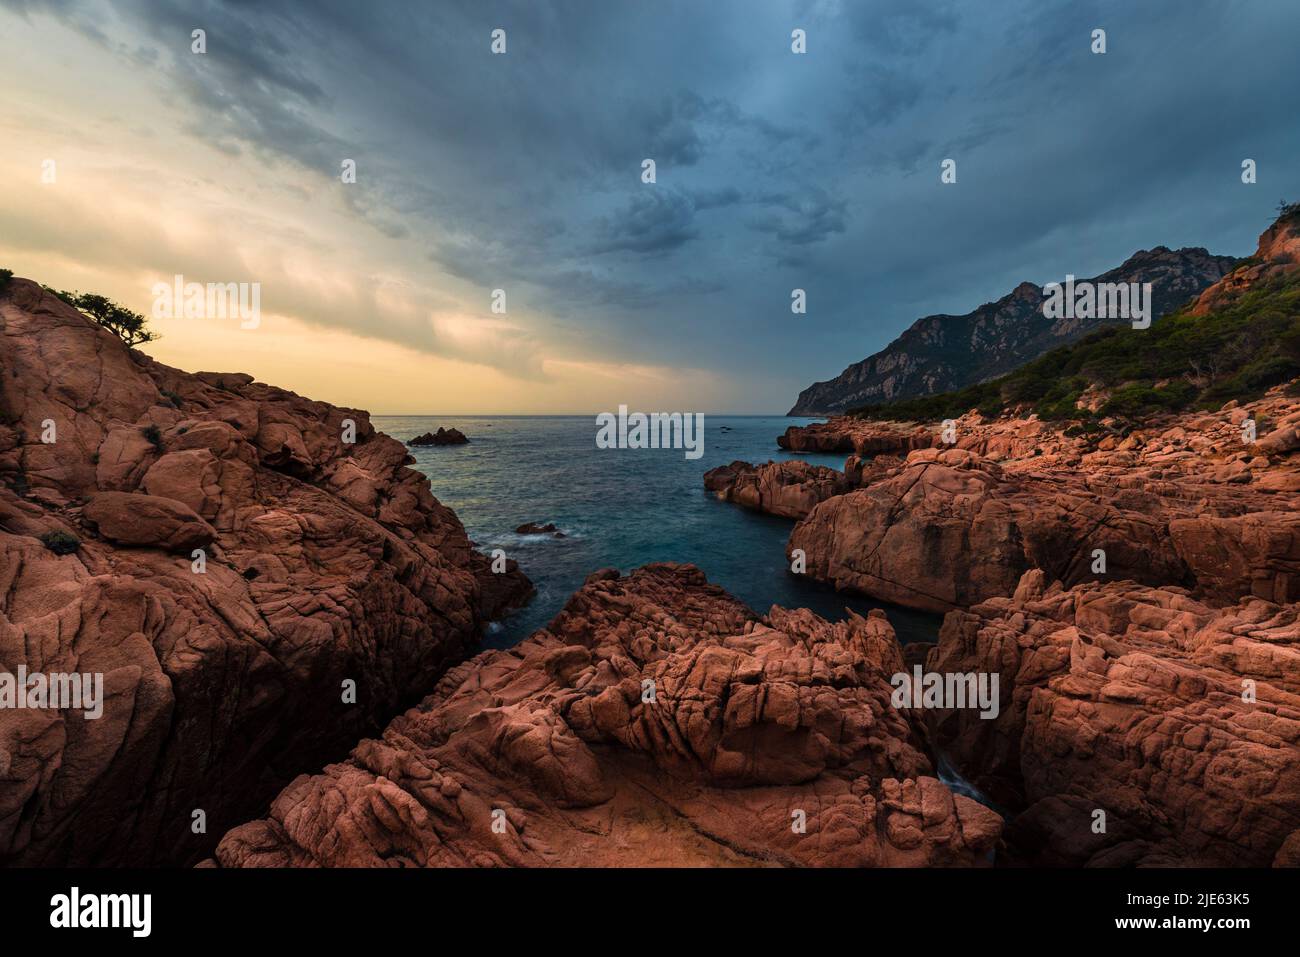 Sunrise with dramatic sky at the bay of Coccorocci with the red porphyry rocks, grey pebbles and Monte Cartucceddu on the east coast of Sardinia Stock Photo